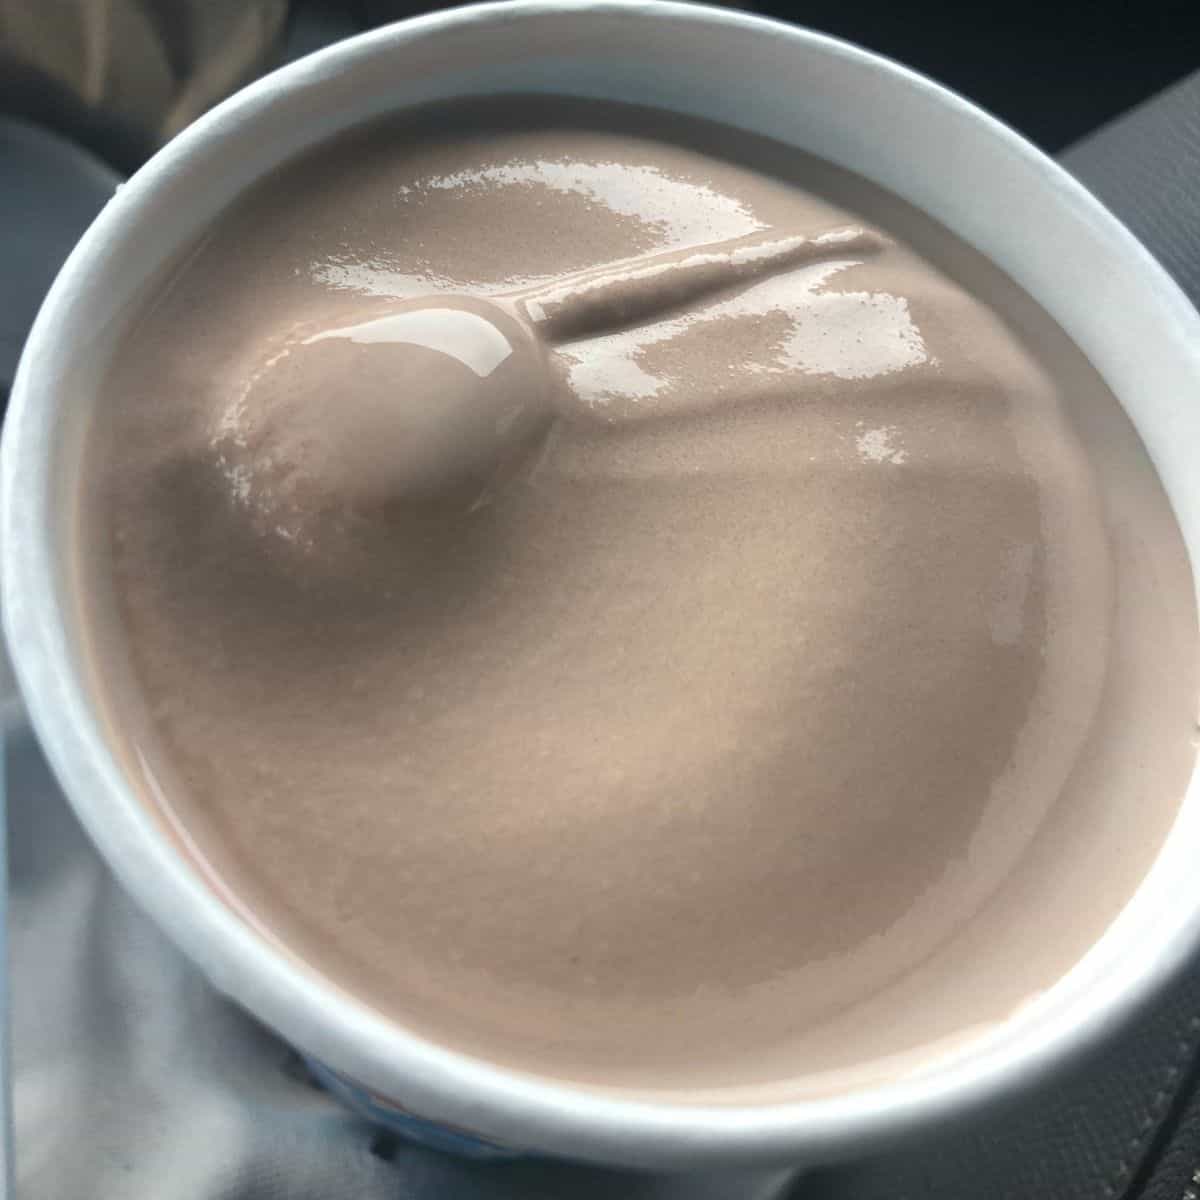 Wendys Chocolate Frosty in a white cup